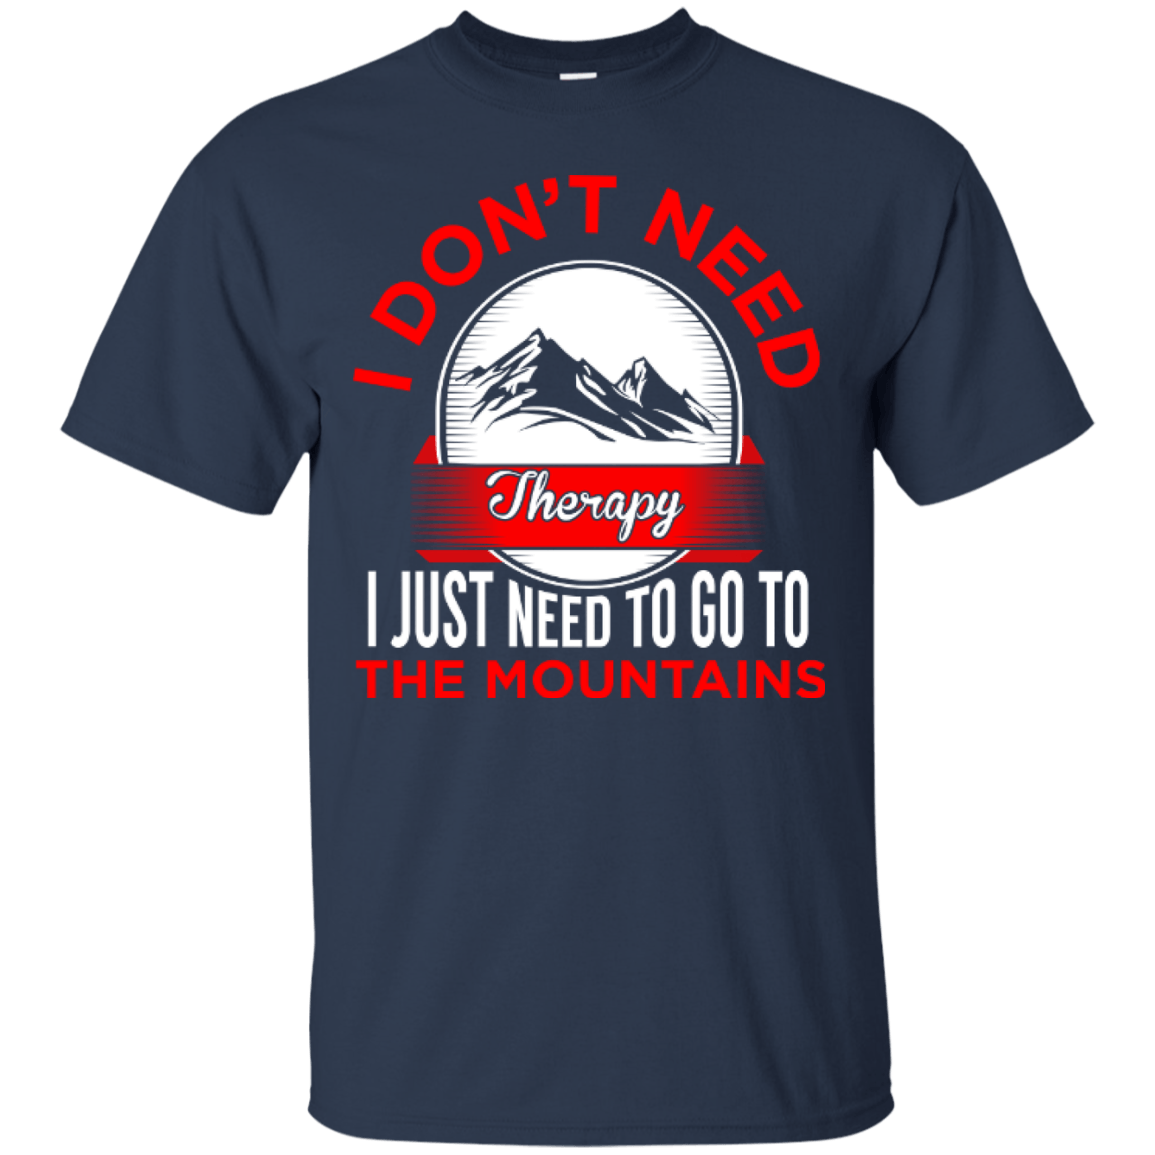 I Don't Need Therapy I Just Need To Go To The Mountains Tees - Powderaddicts